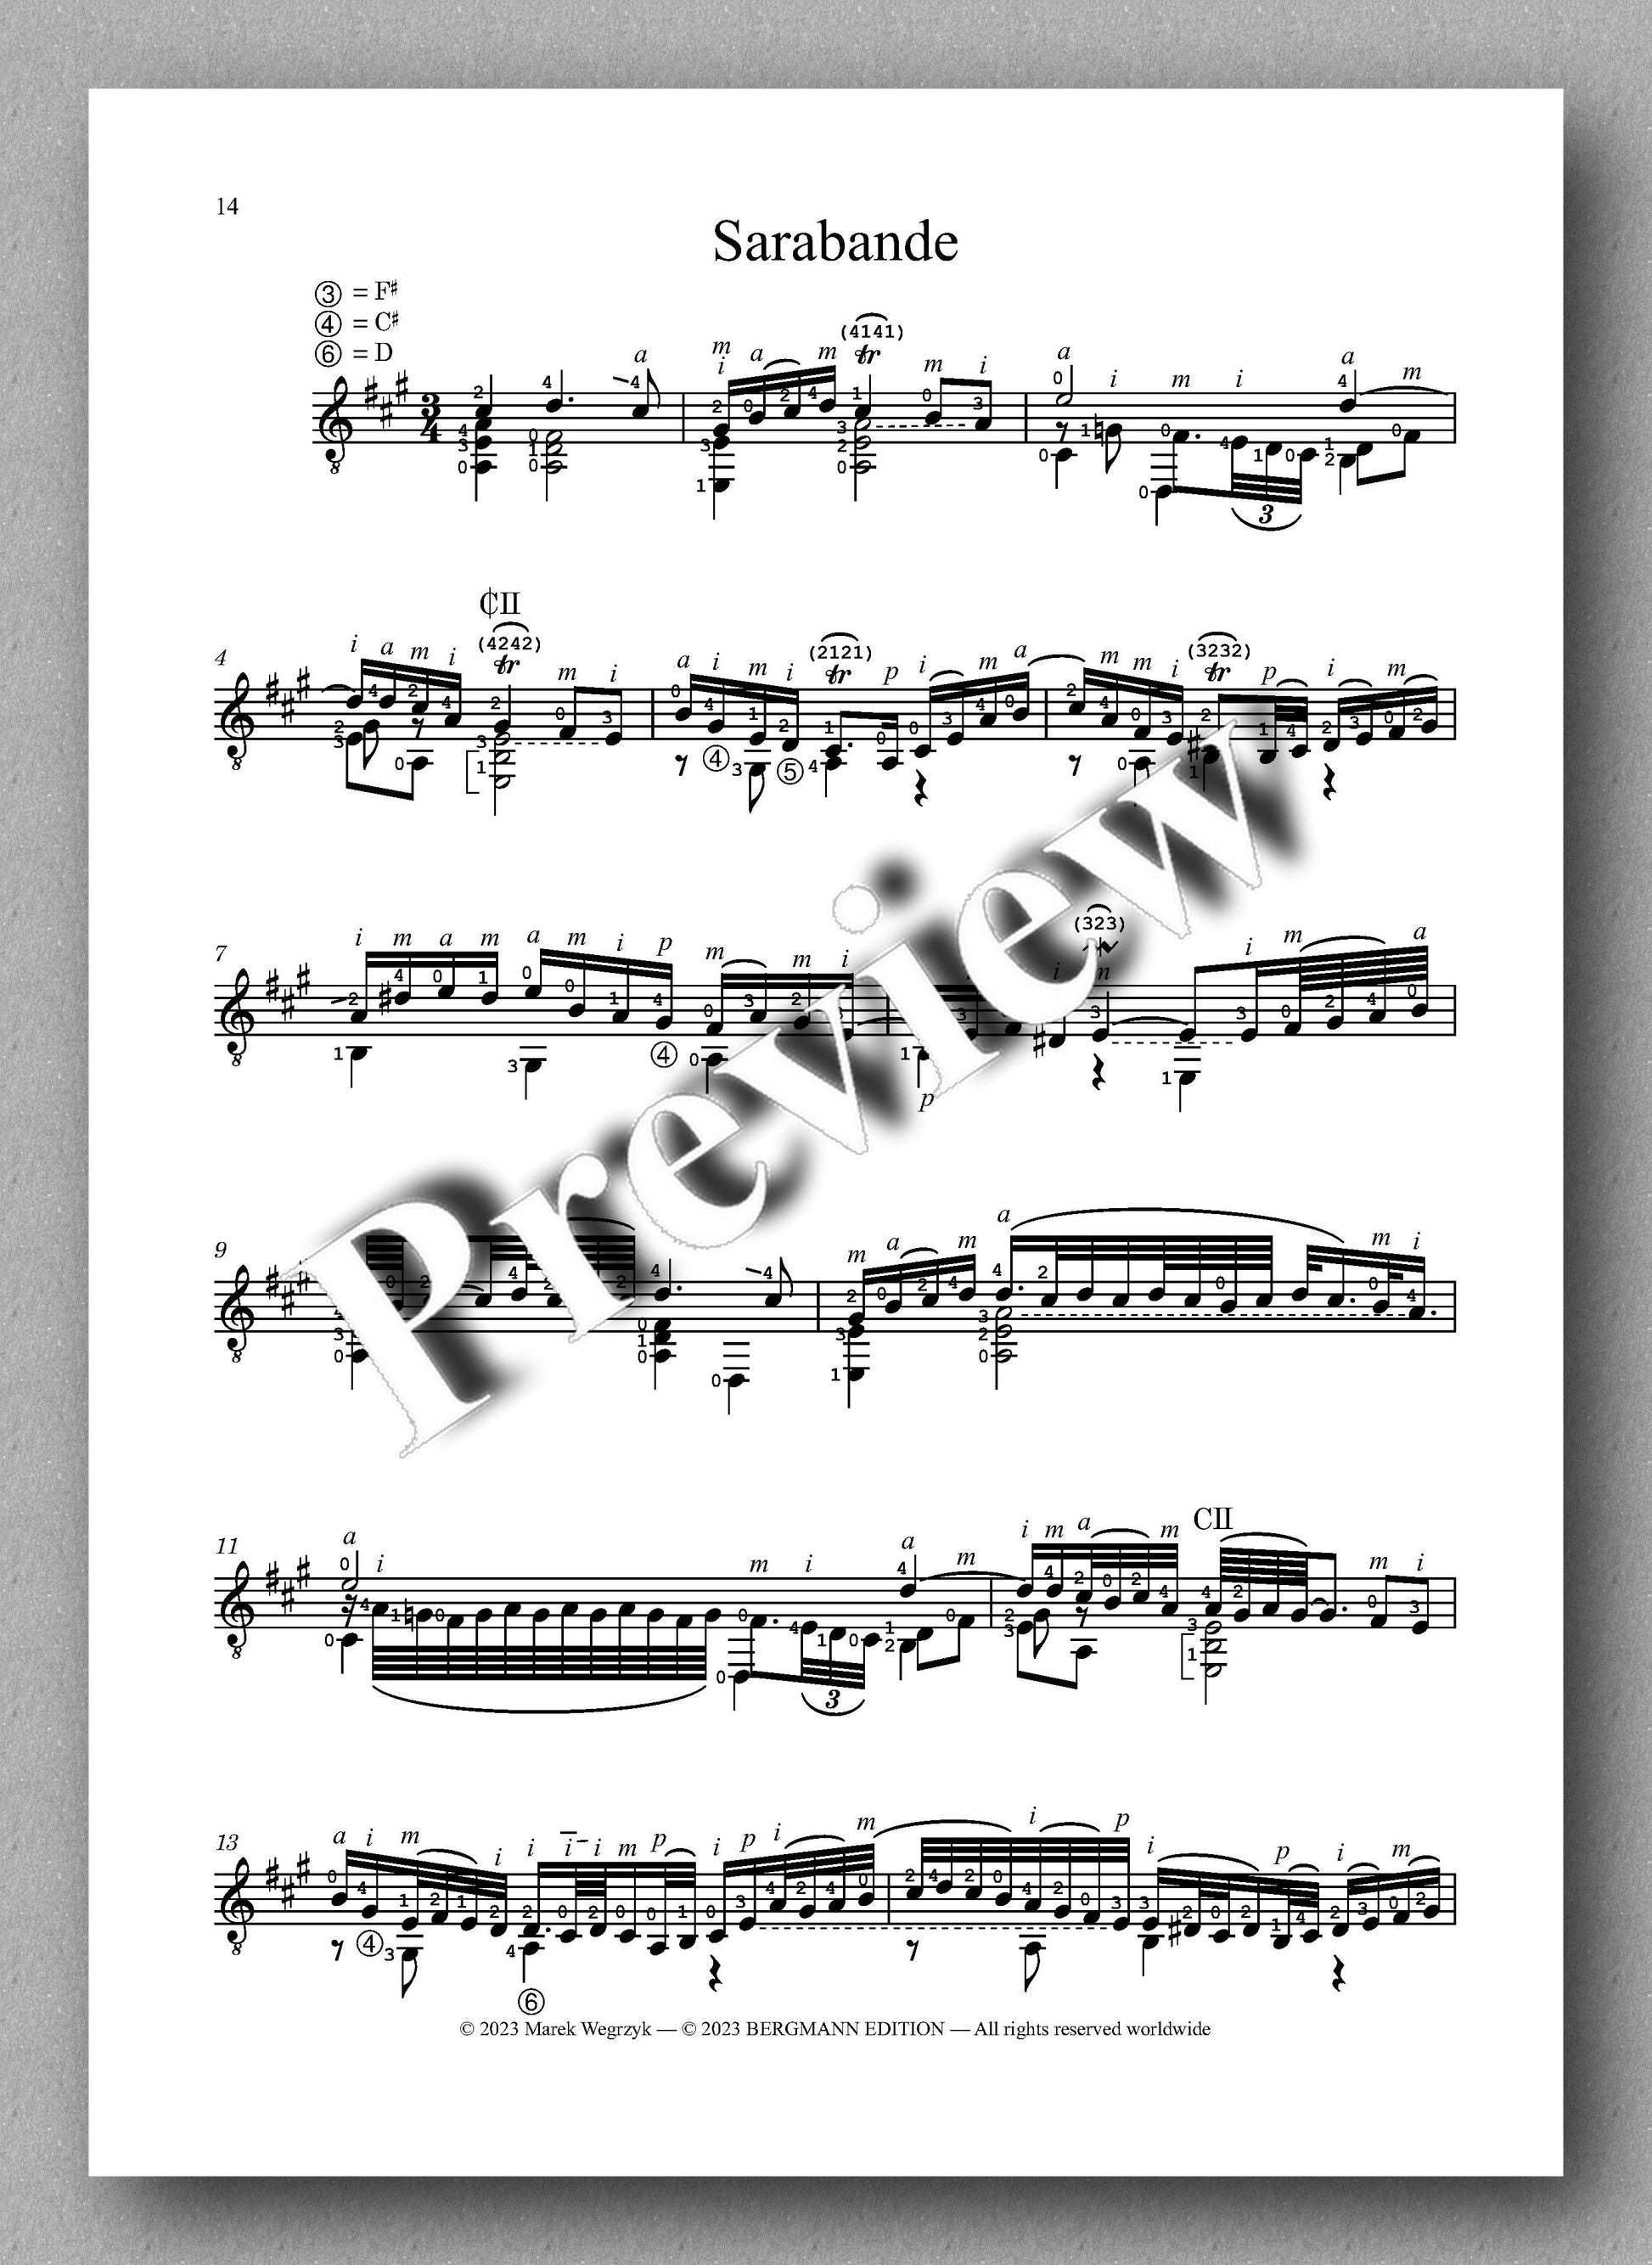 Bach-Wegrzyk, Suite n°1 BWV 1007 - preview of the sarabande